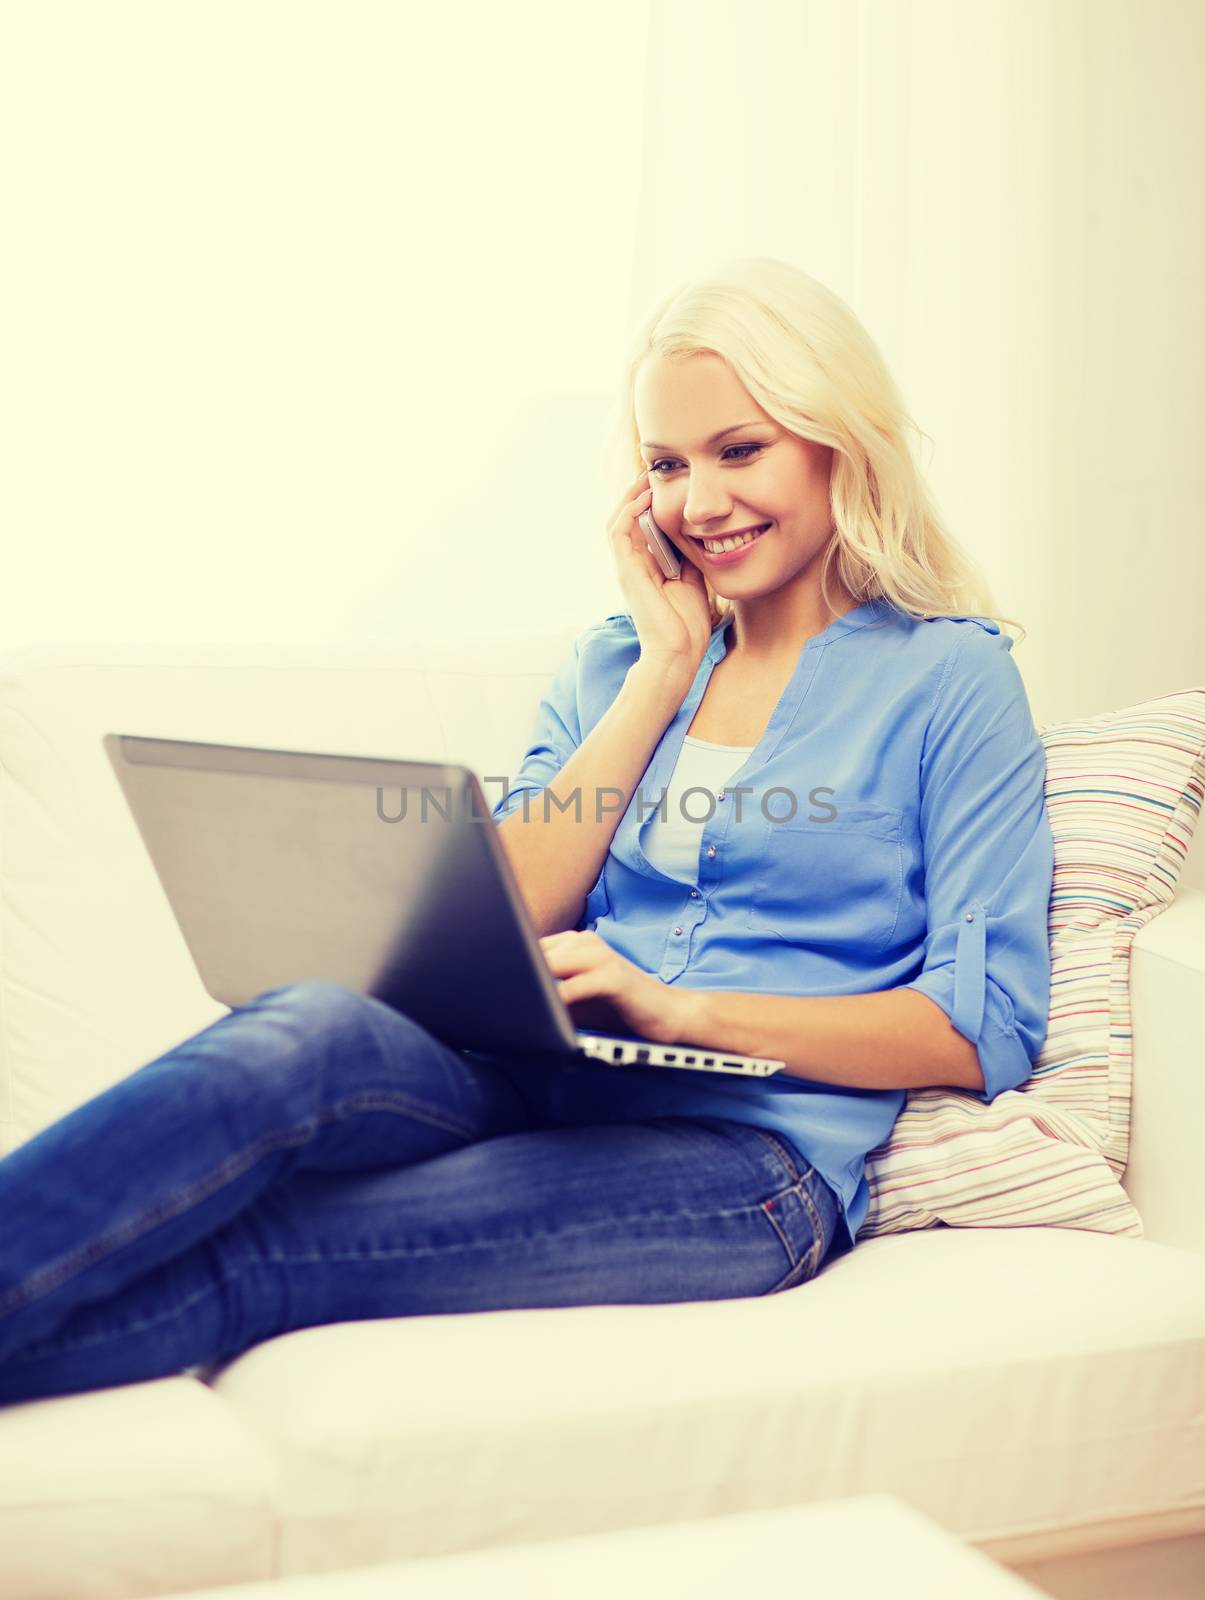 home, technology and internet concept - smiling woman with smartphone and laptop computer sitting on couch at home